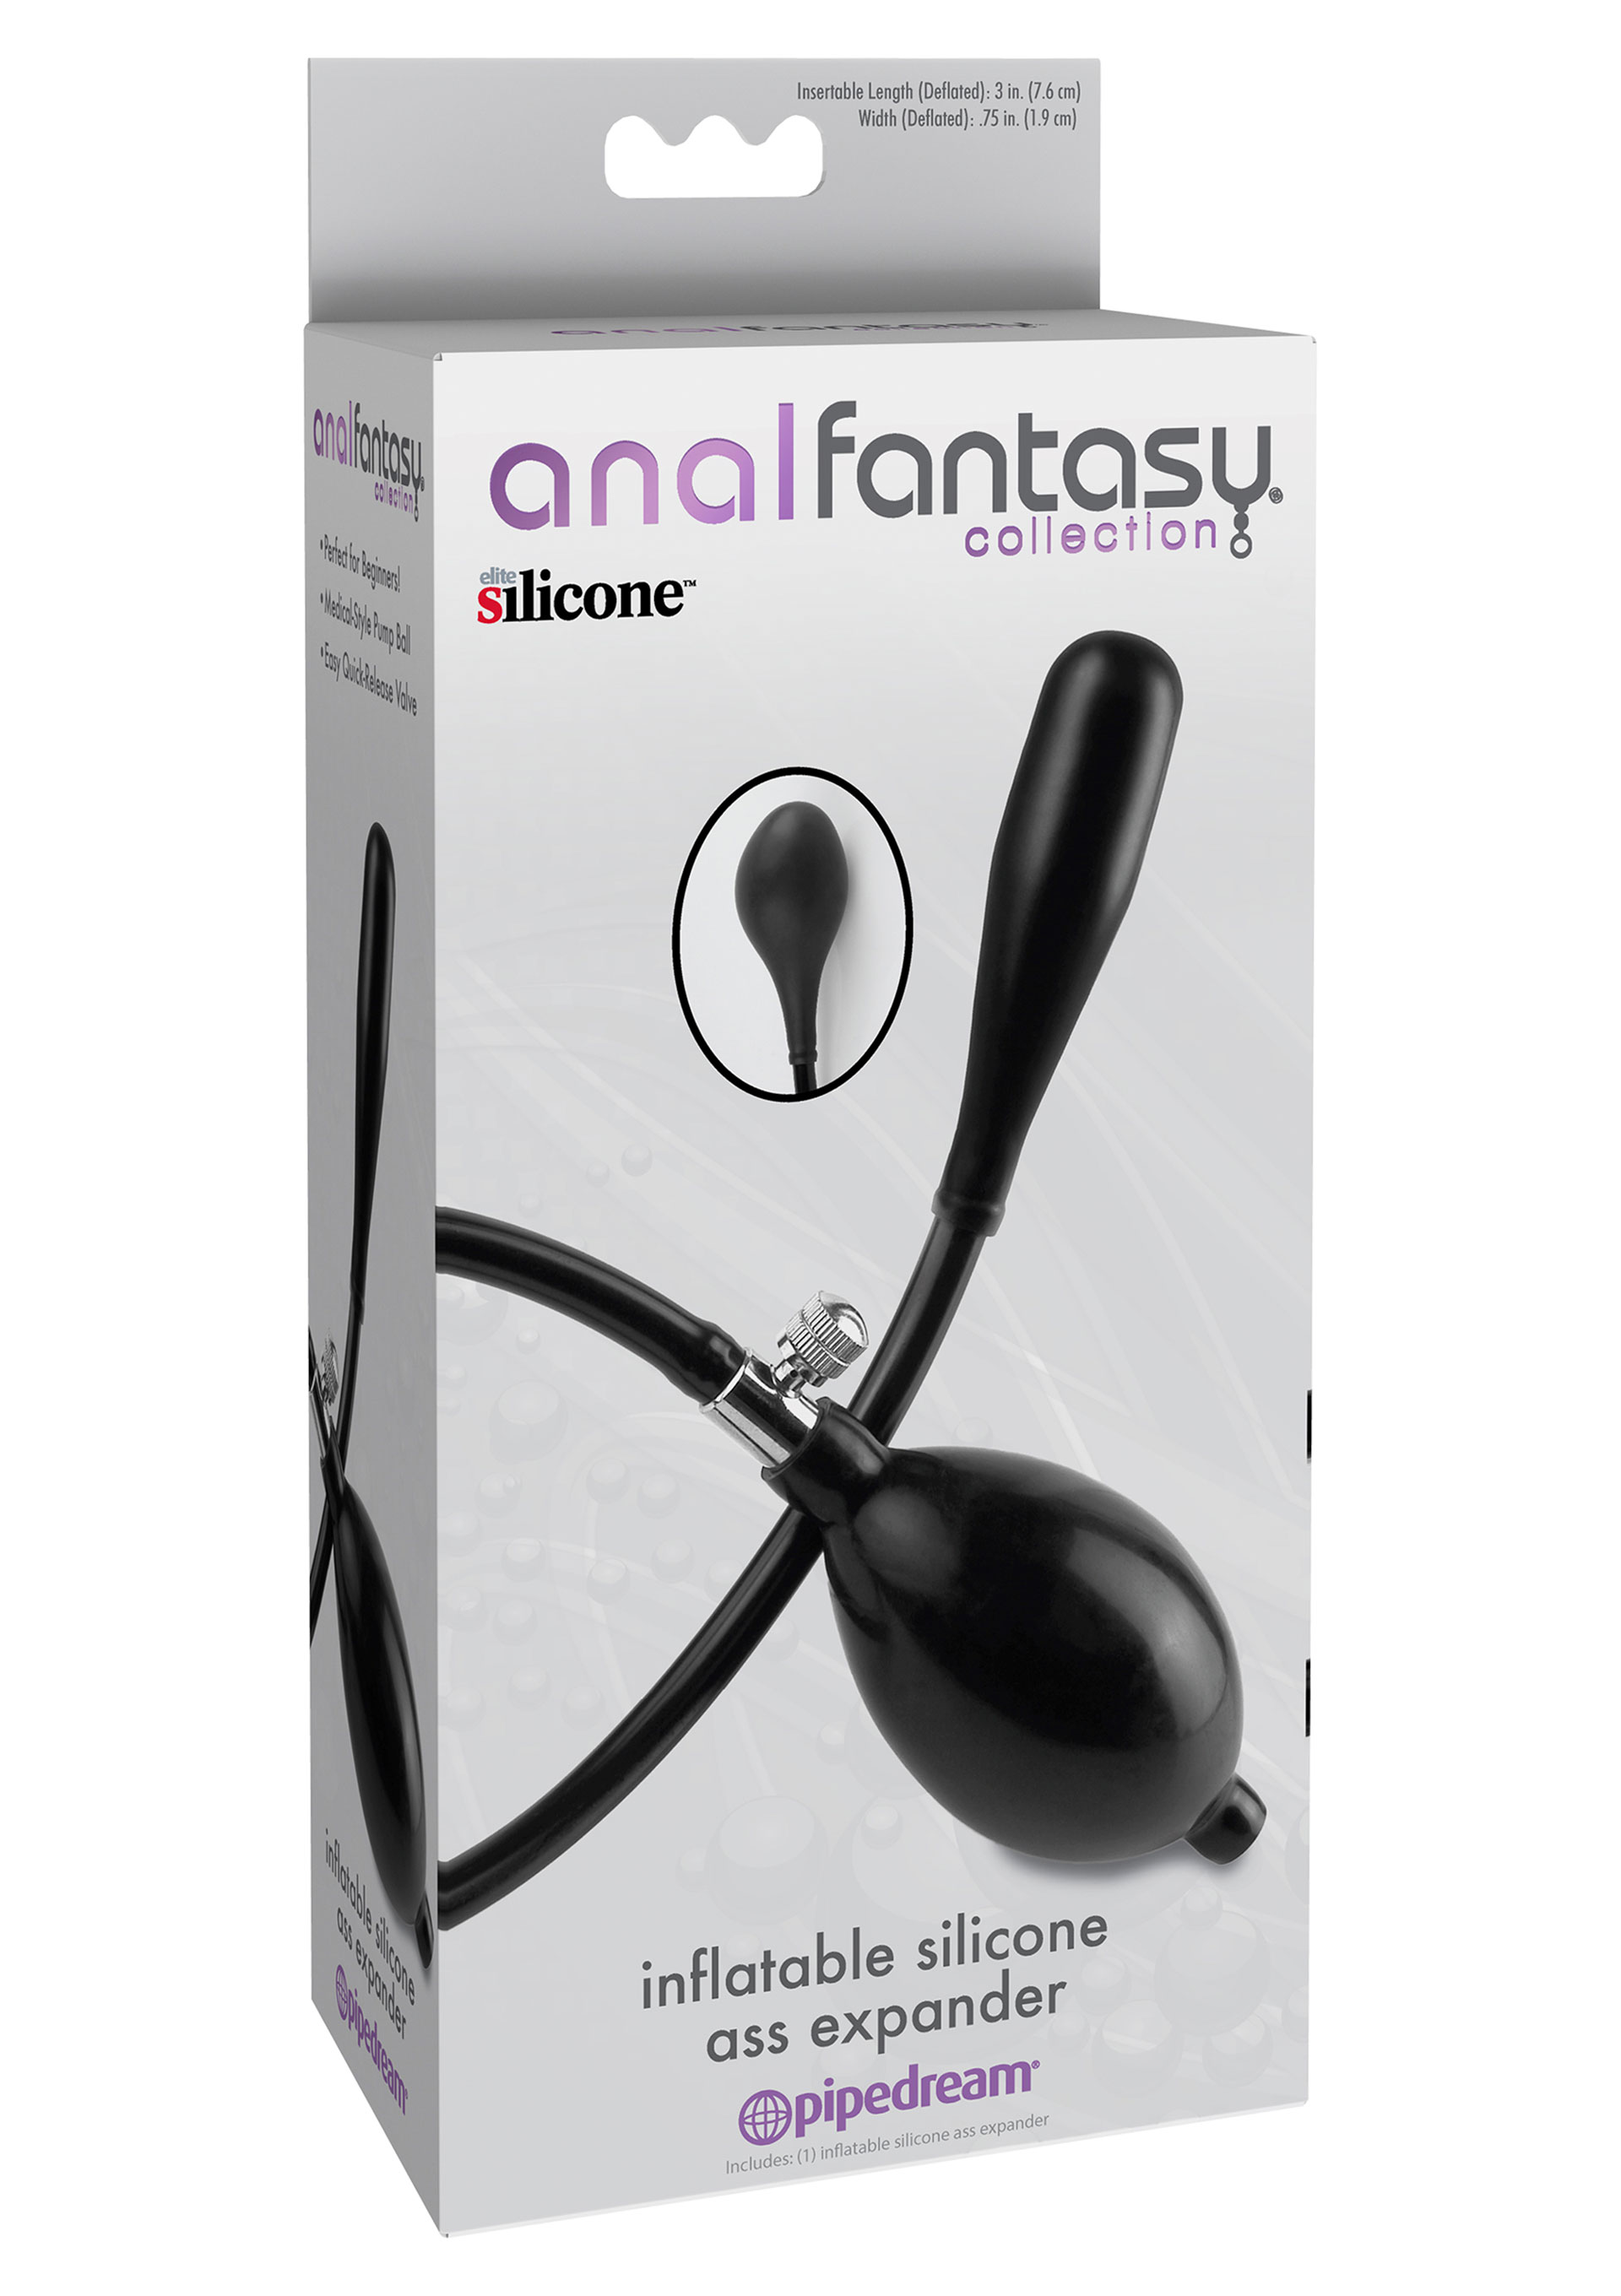 Inflatable Silicone Ass Expander.